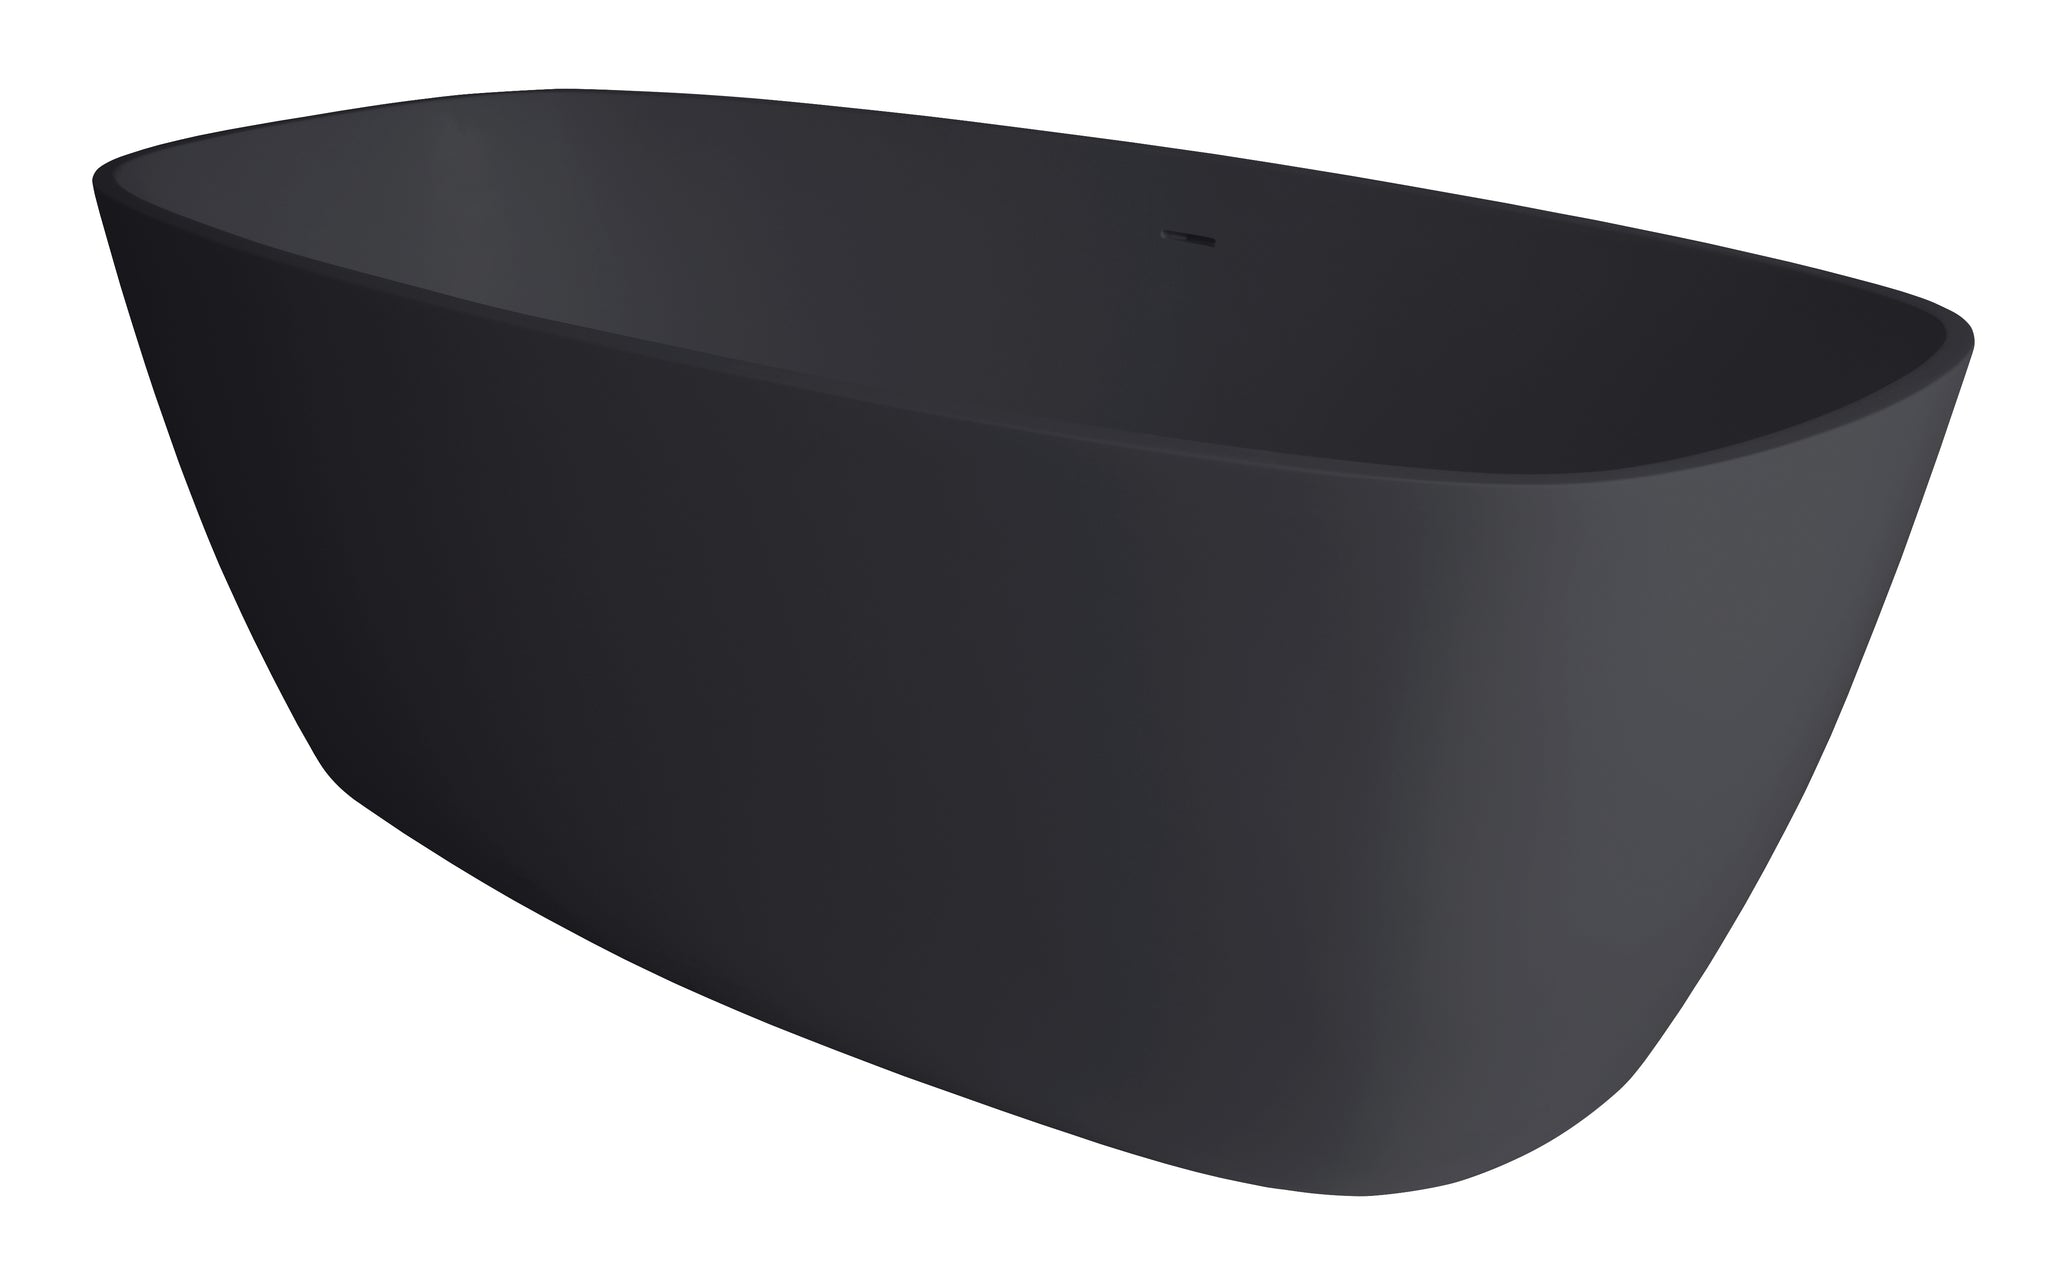 Vive Bath 1610x750mm (no waste included)